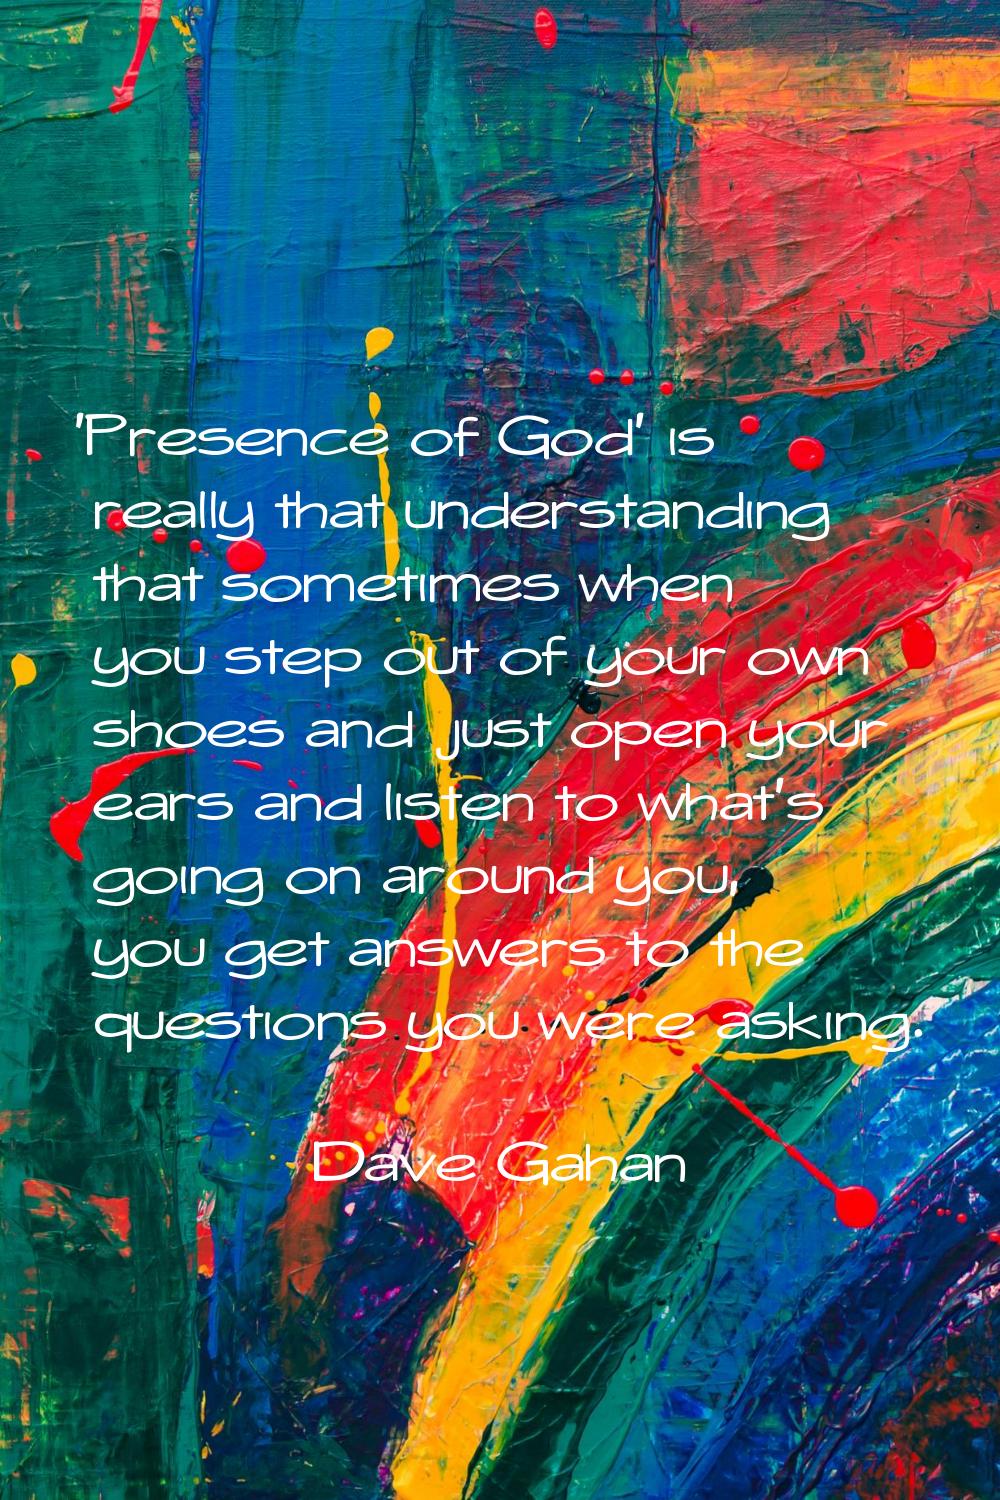 'Presence of God' is really that understanding that sometimes when you step out of your own shoes a